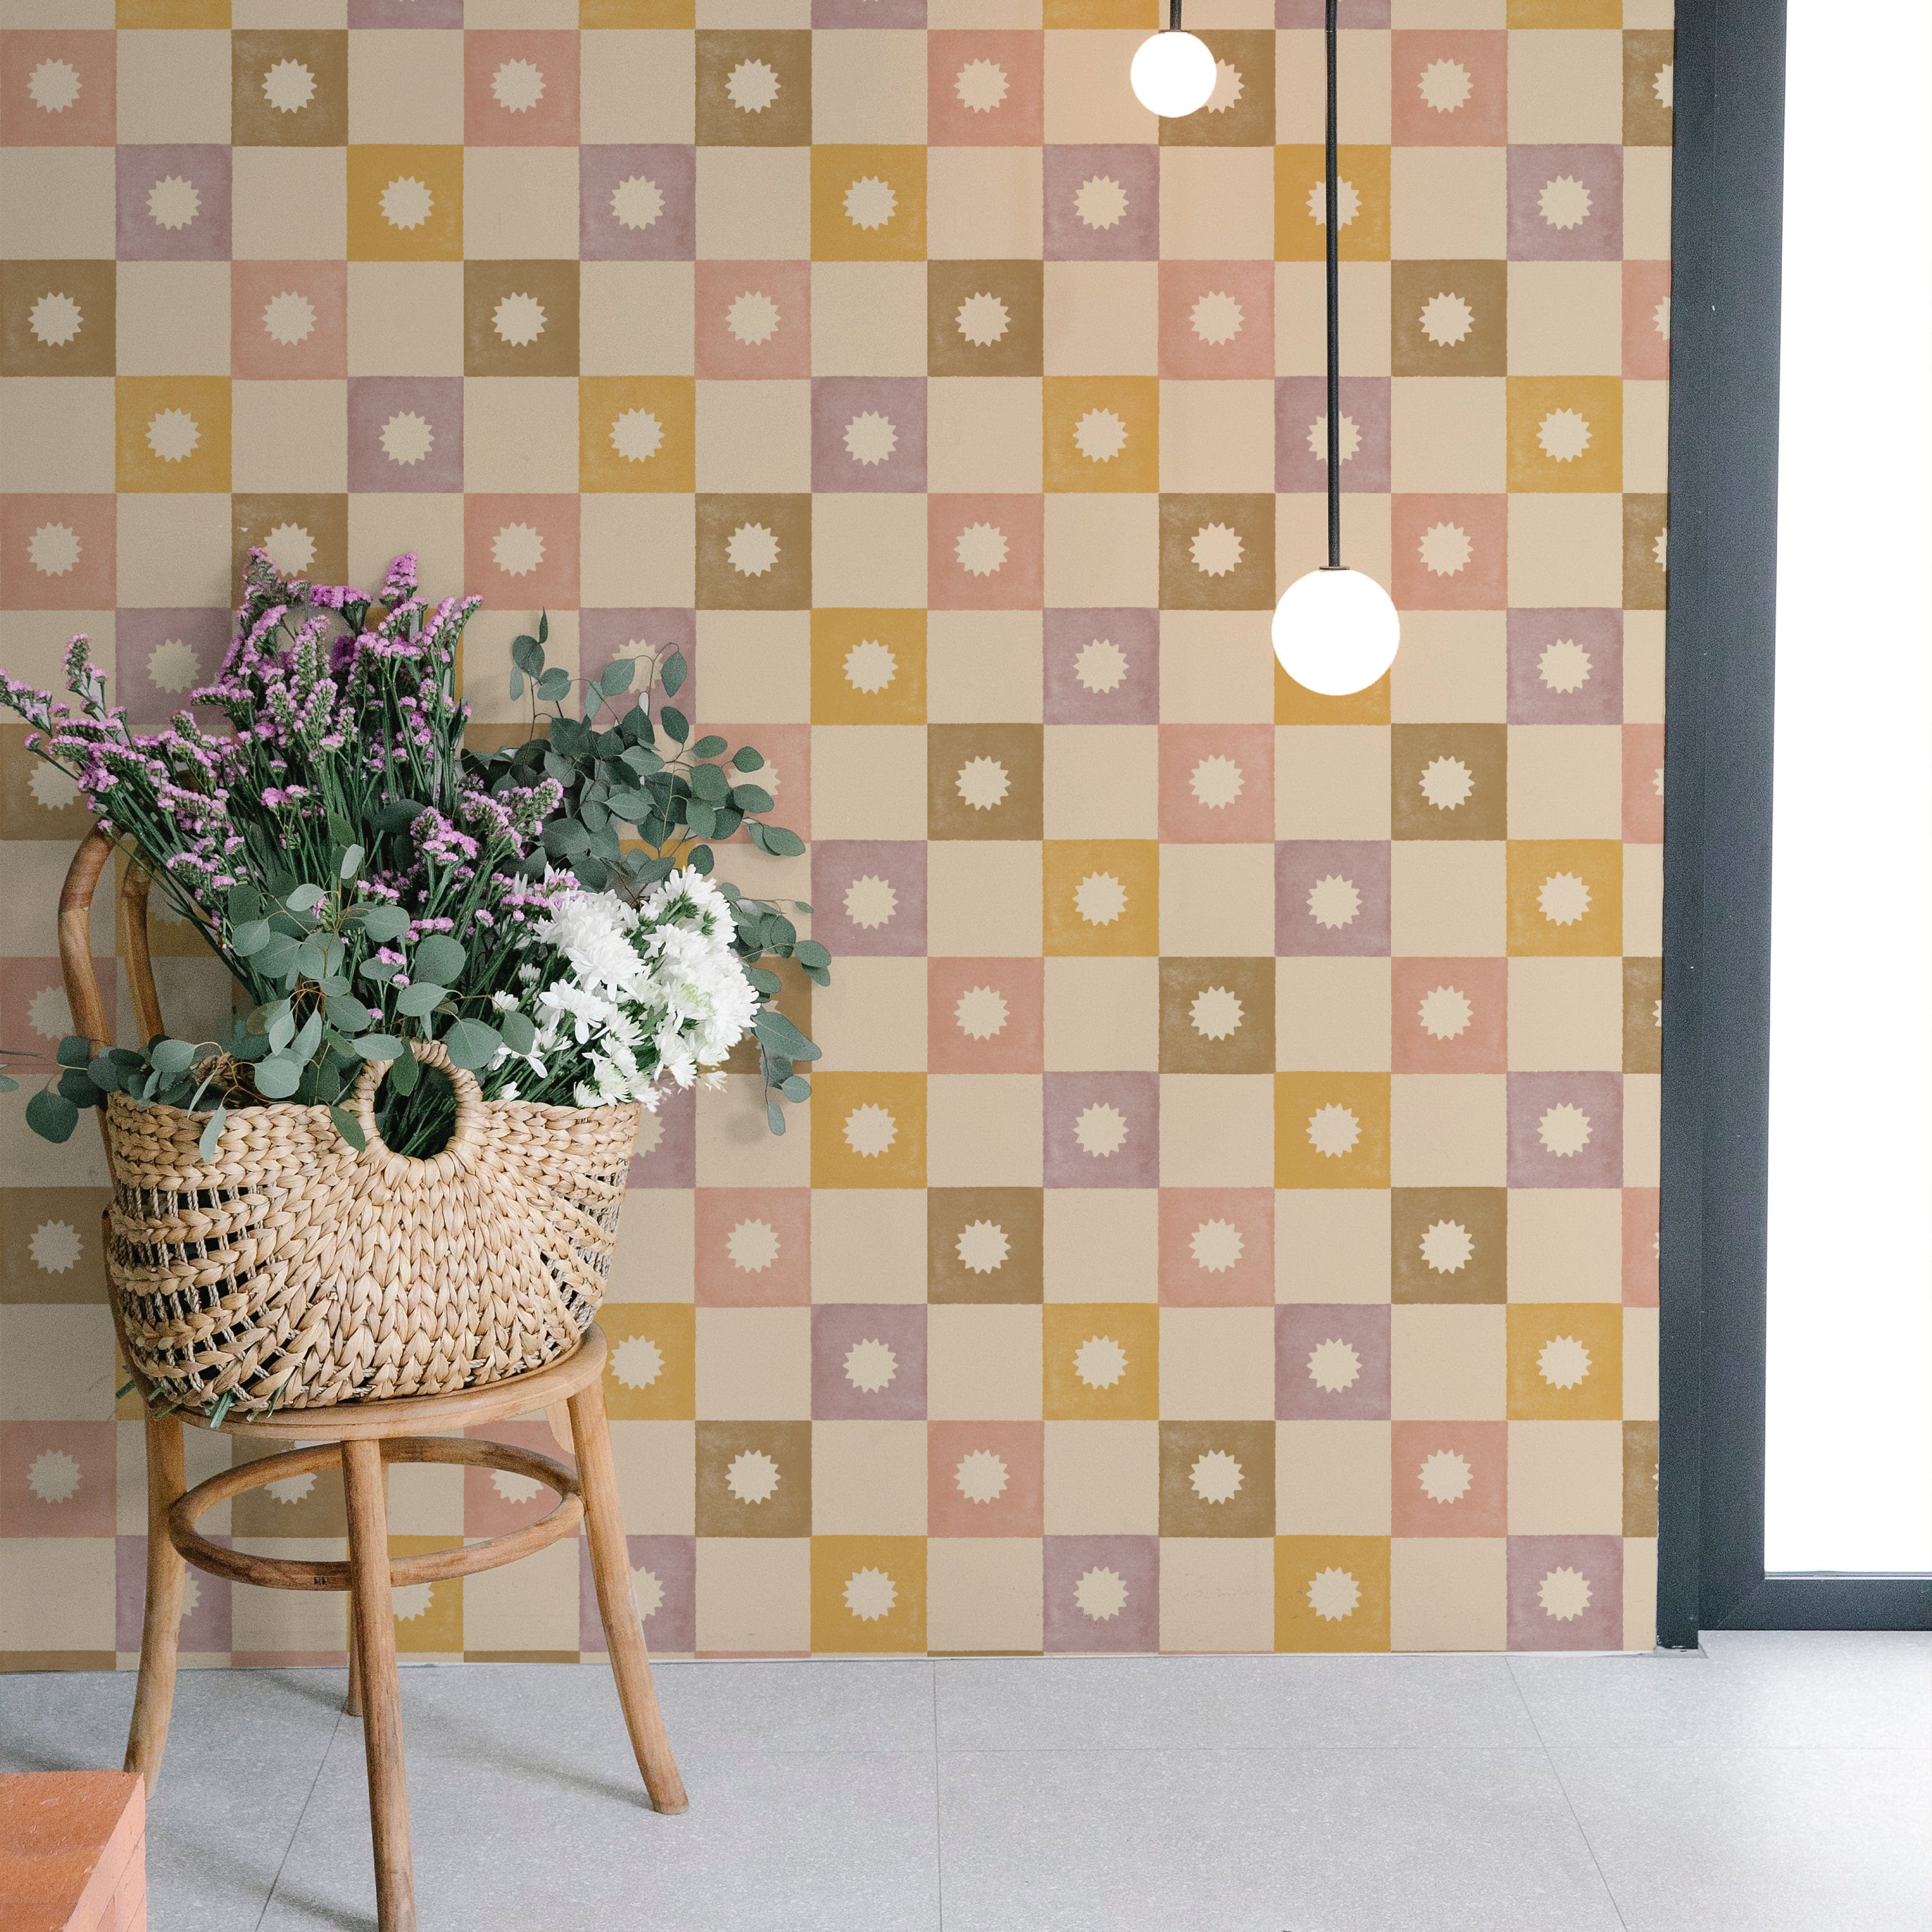 A stylish room corner decorated with Céline Wallpaper, illustrating a pastel checkered design with sunburst motifs. The wallpaper complements a modern setting, enhanced by a rattan chair adorned with fresh flowers, creating a chic and welcoming space